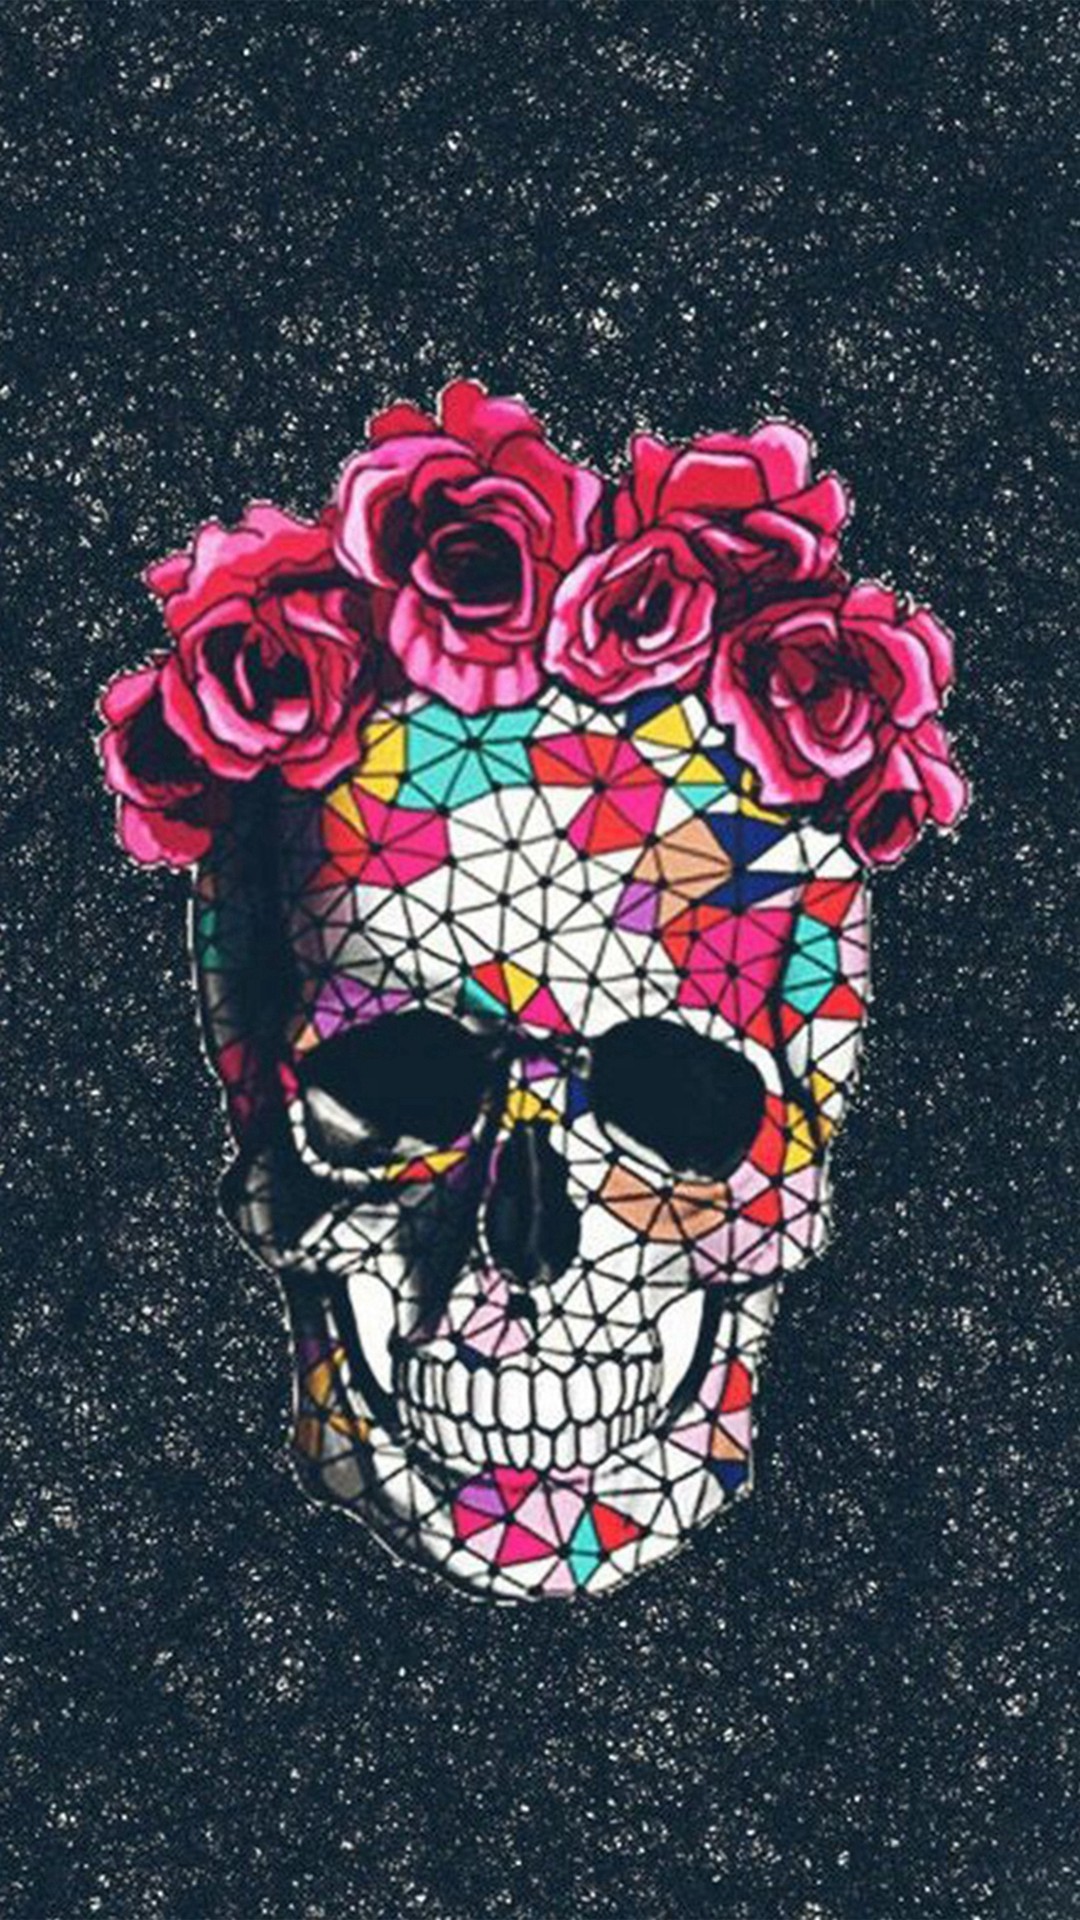 1080x1920 Colorful Skull Roses Space iPhone 8 wallpaper